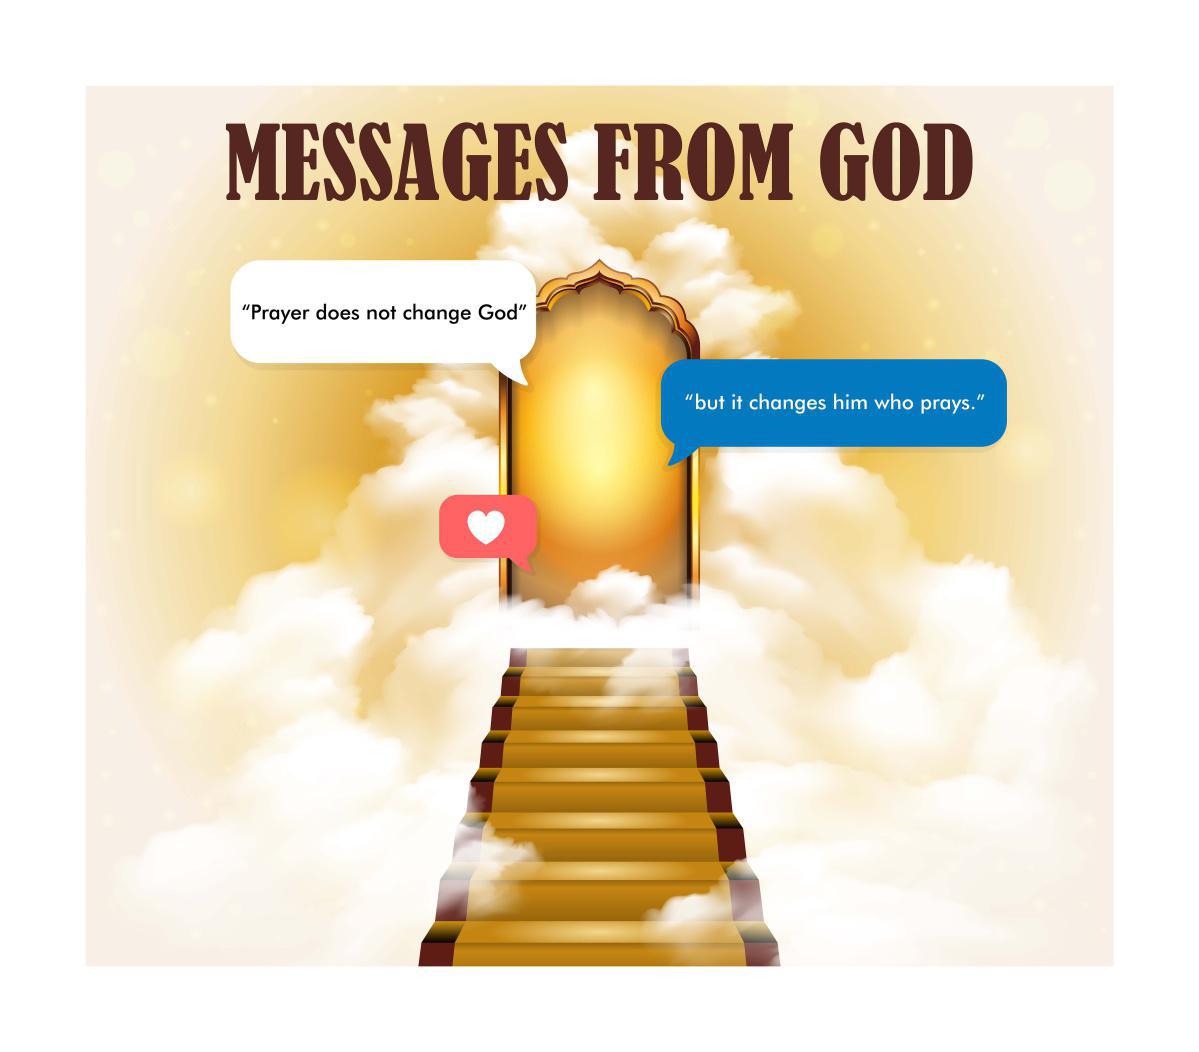 Messages from God Prank